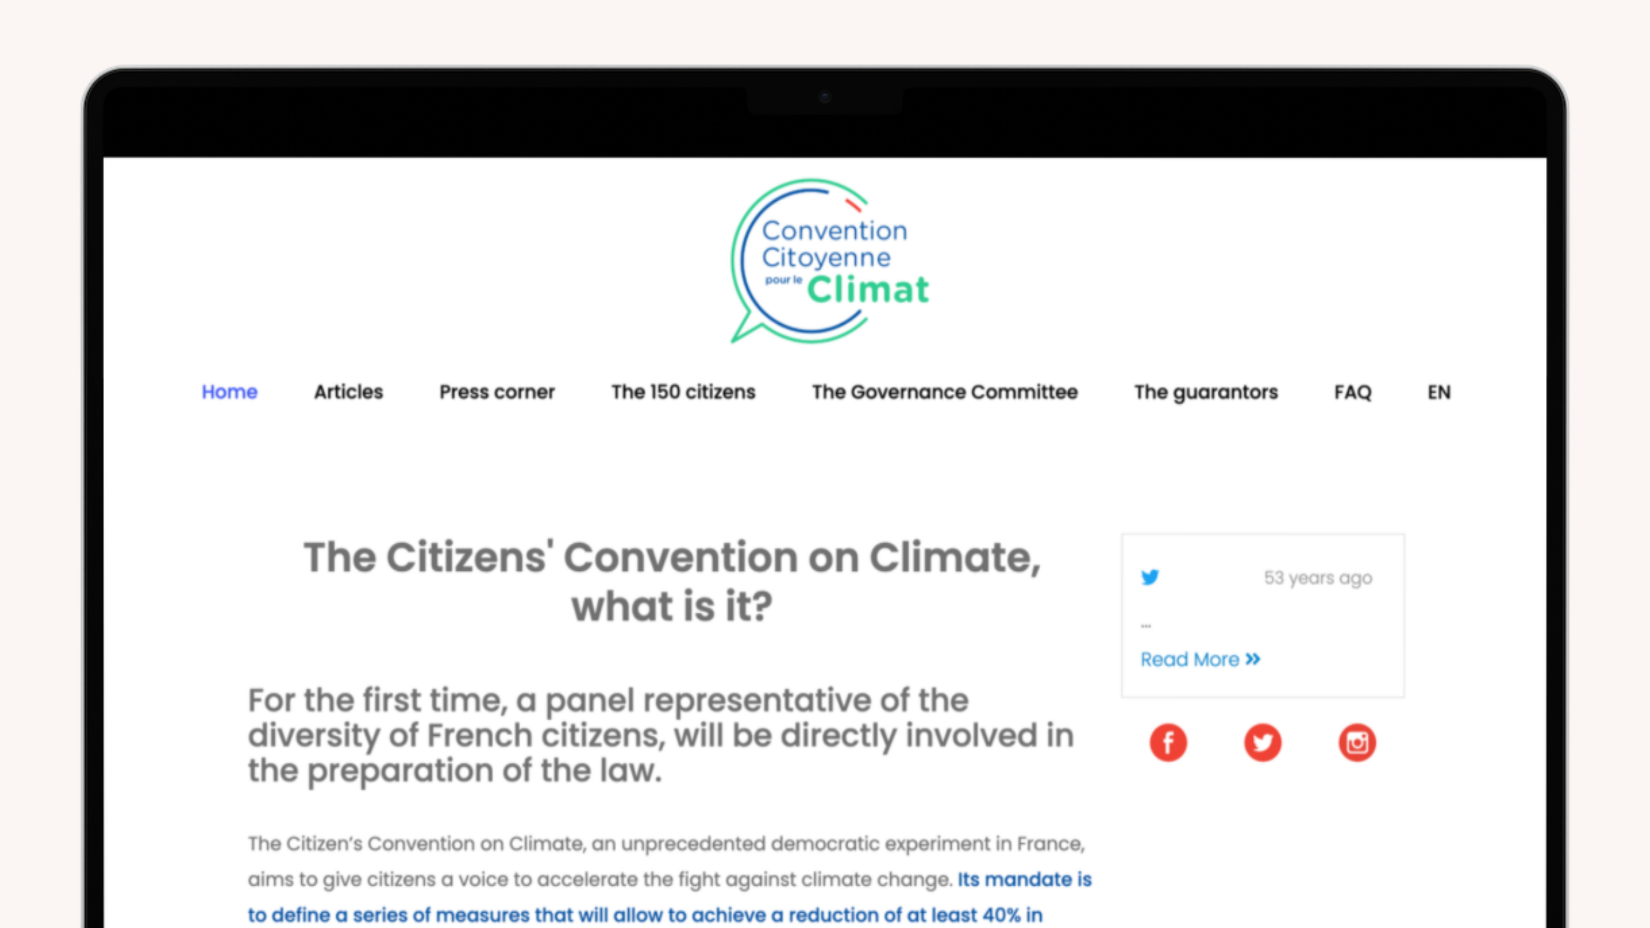 Mockup of the landing page for France's climate assembly